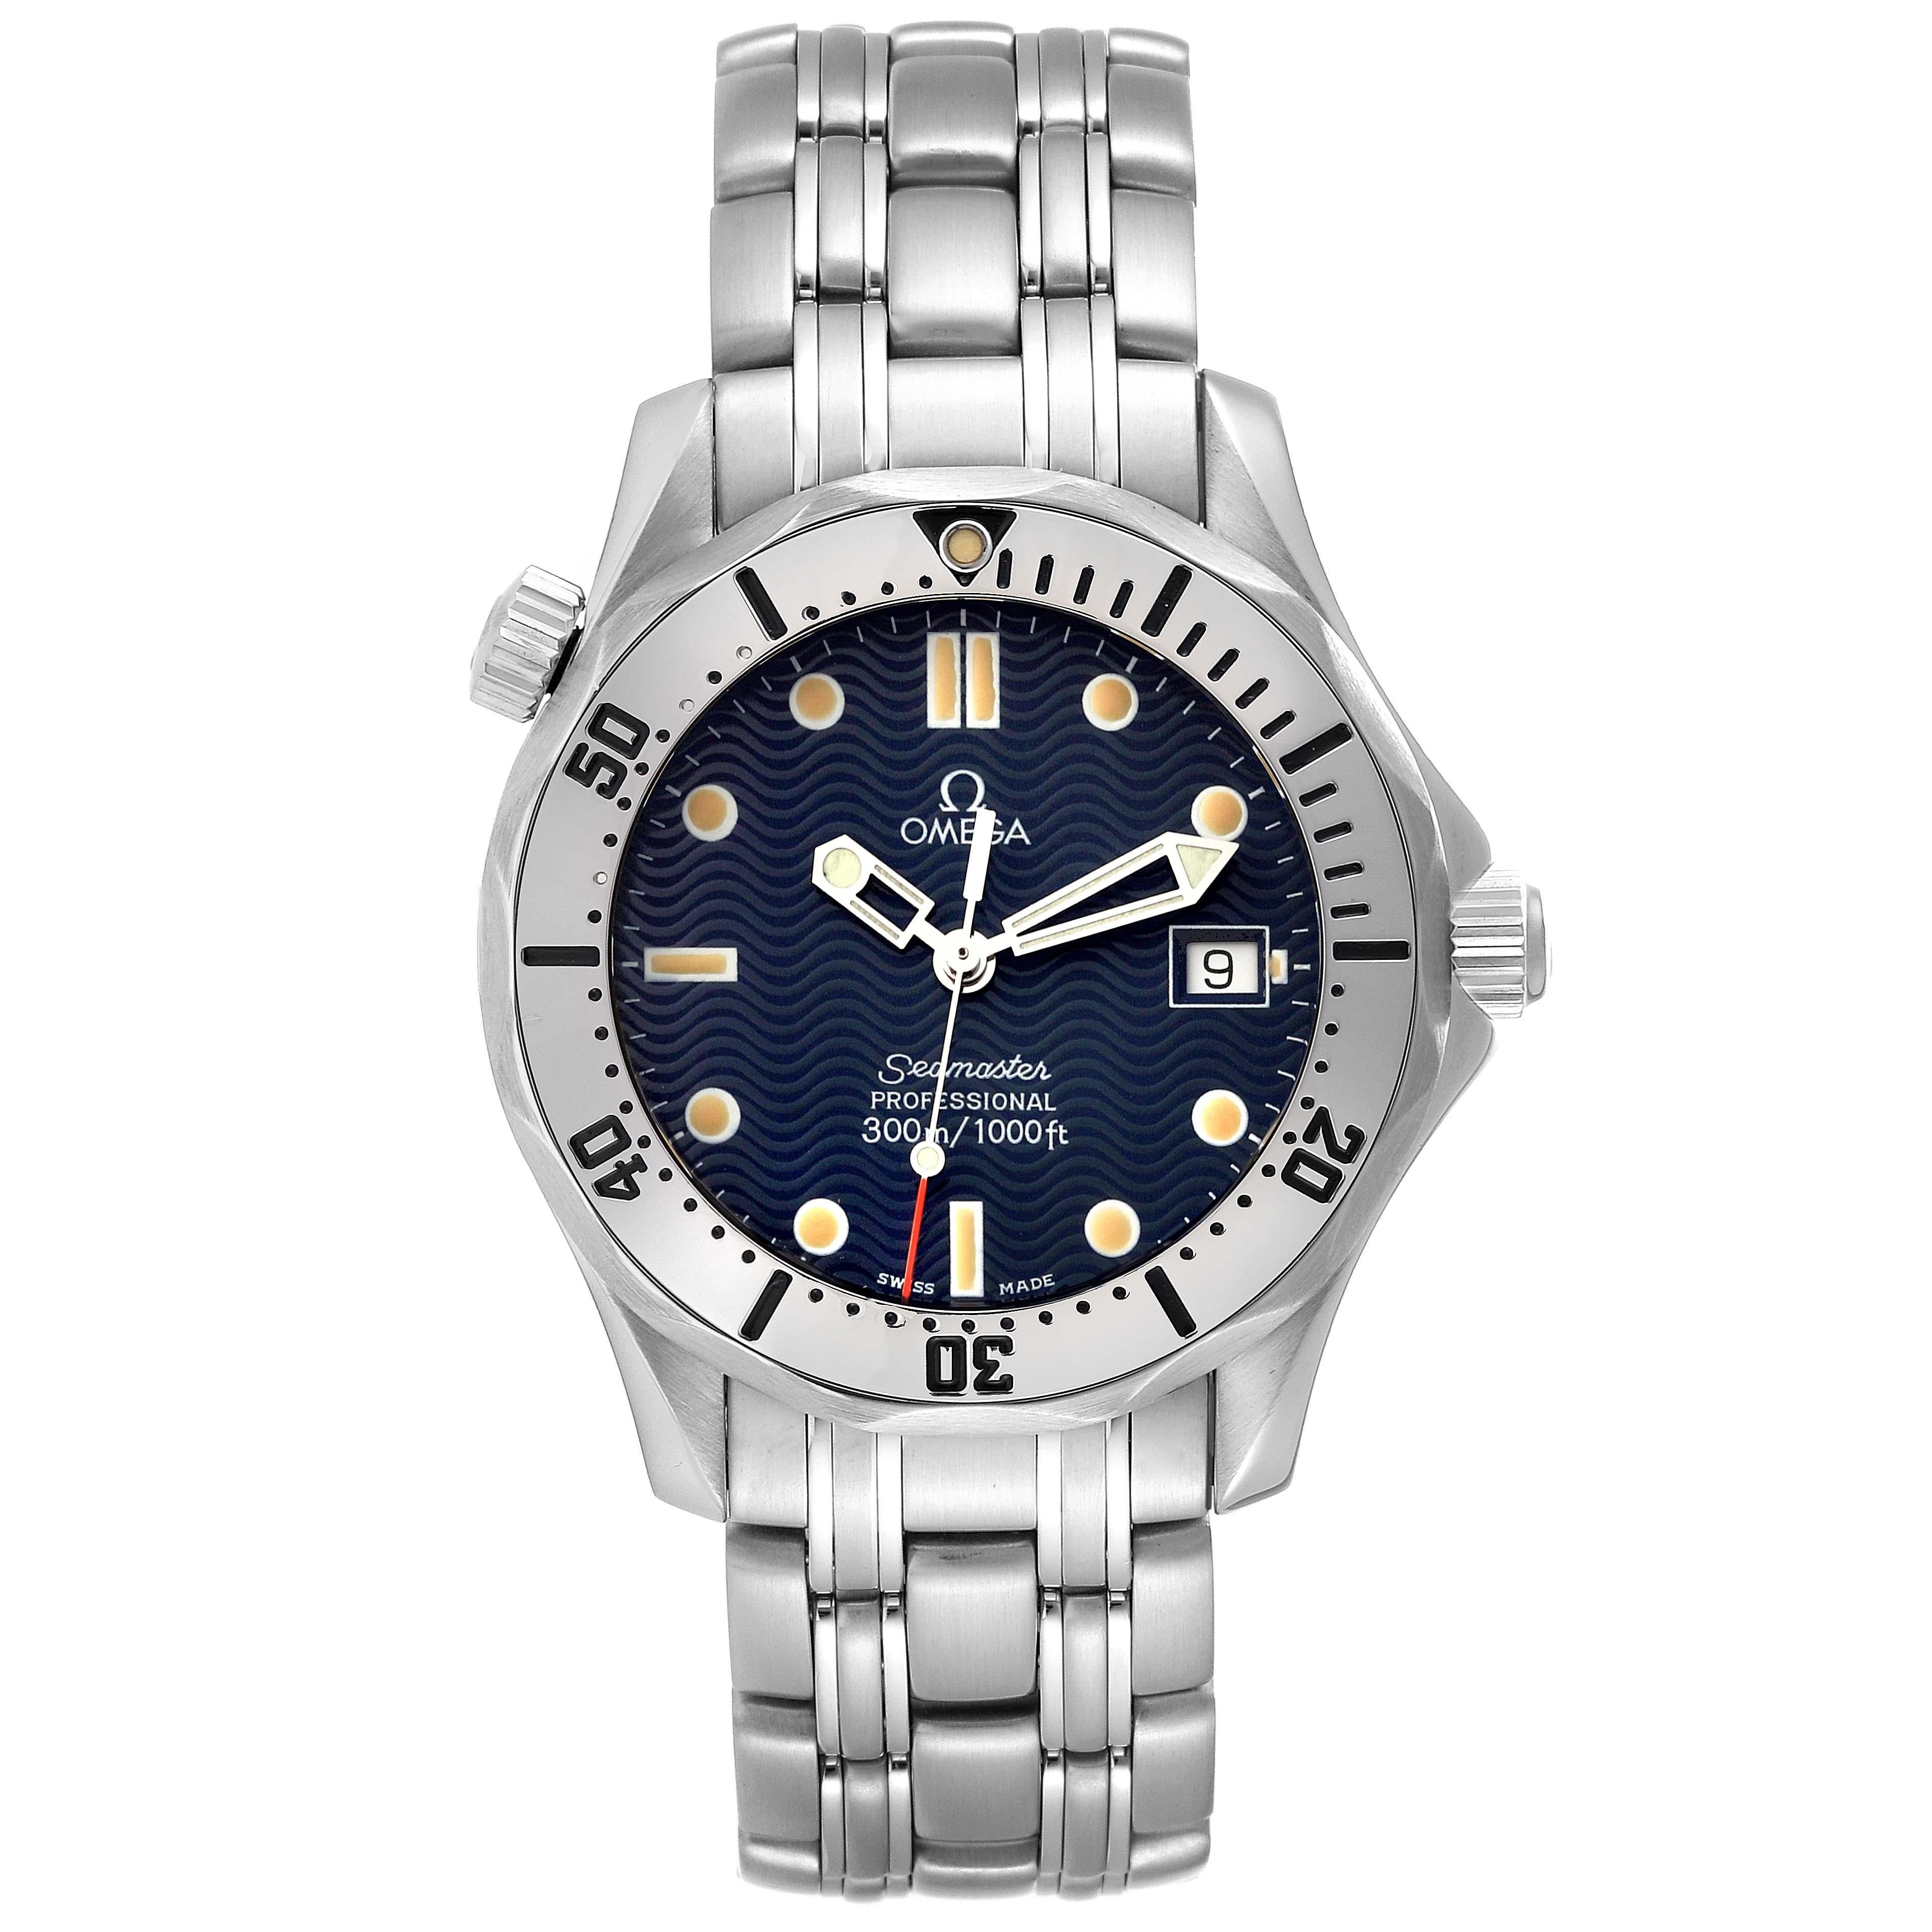 Omega Seamaster 300m Midsize 36mm Steel Mens Watch 2562.80.00 Card. Quartz movement. Stainless steel case 36.25 mm in diameter. Omega logo on crown. Unidirectional rotating stainless steel bezel. Scratch resistant sapphire crystal. Blue wave decor